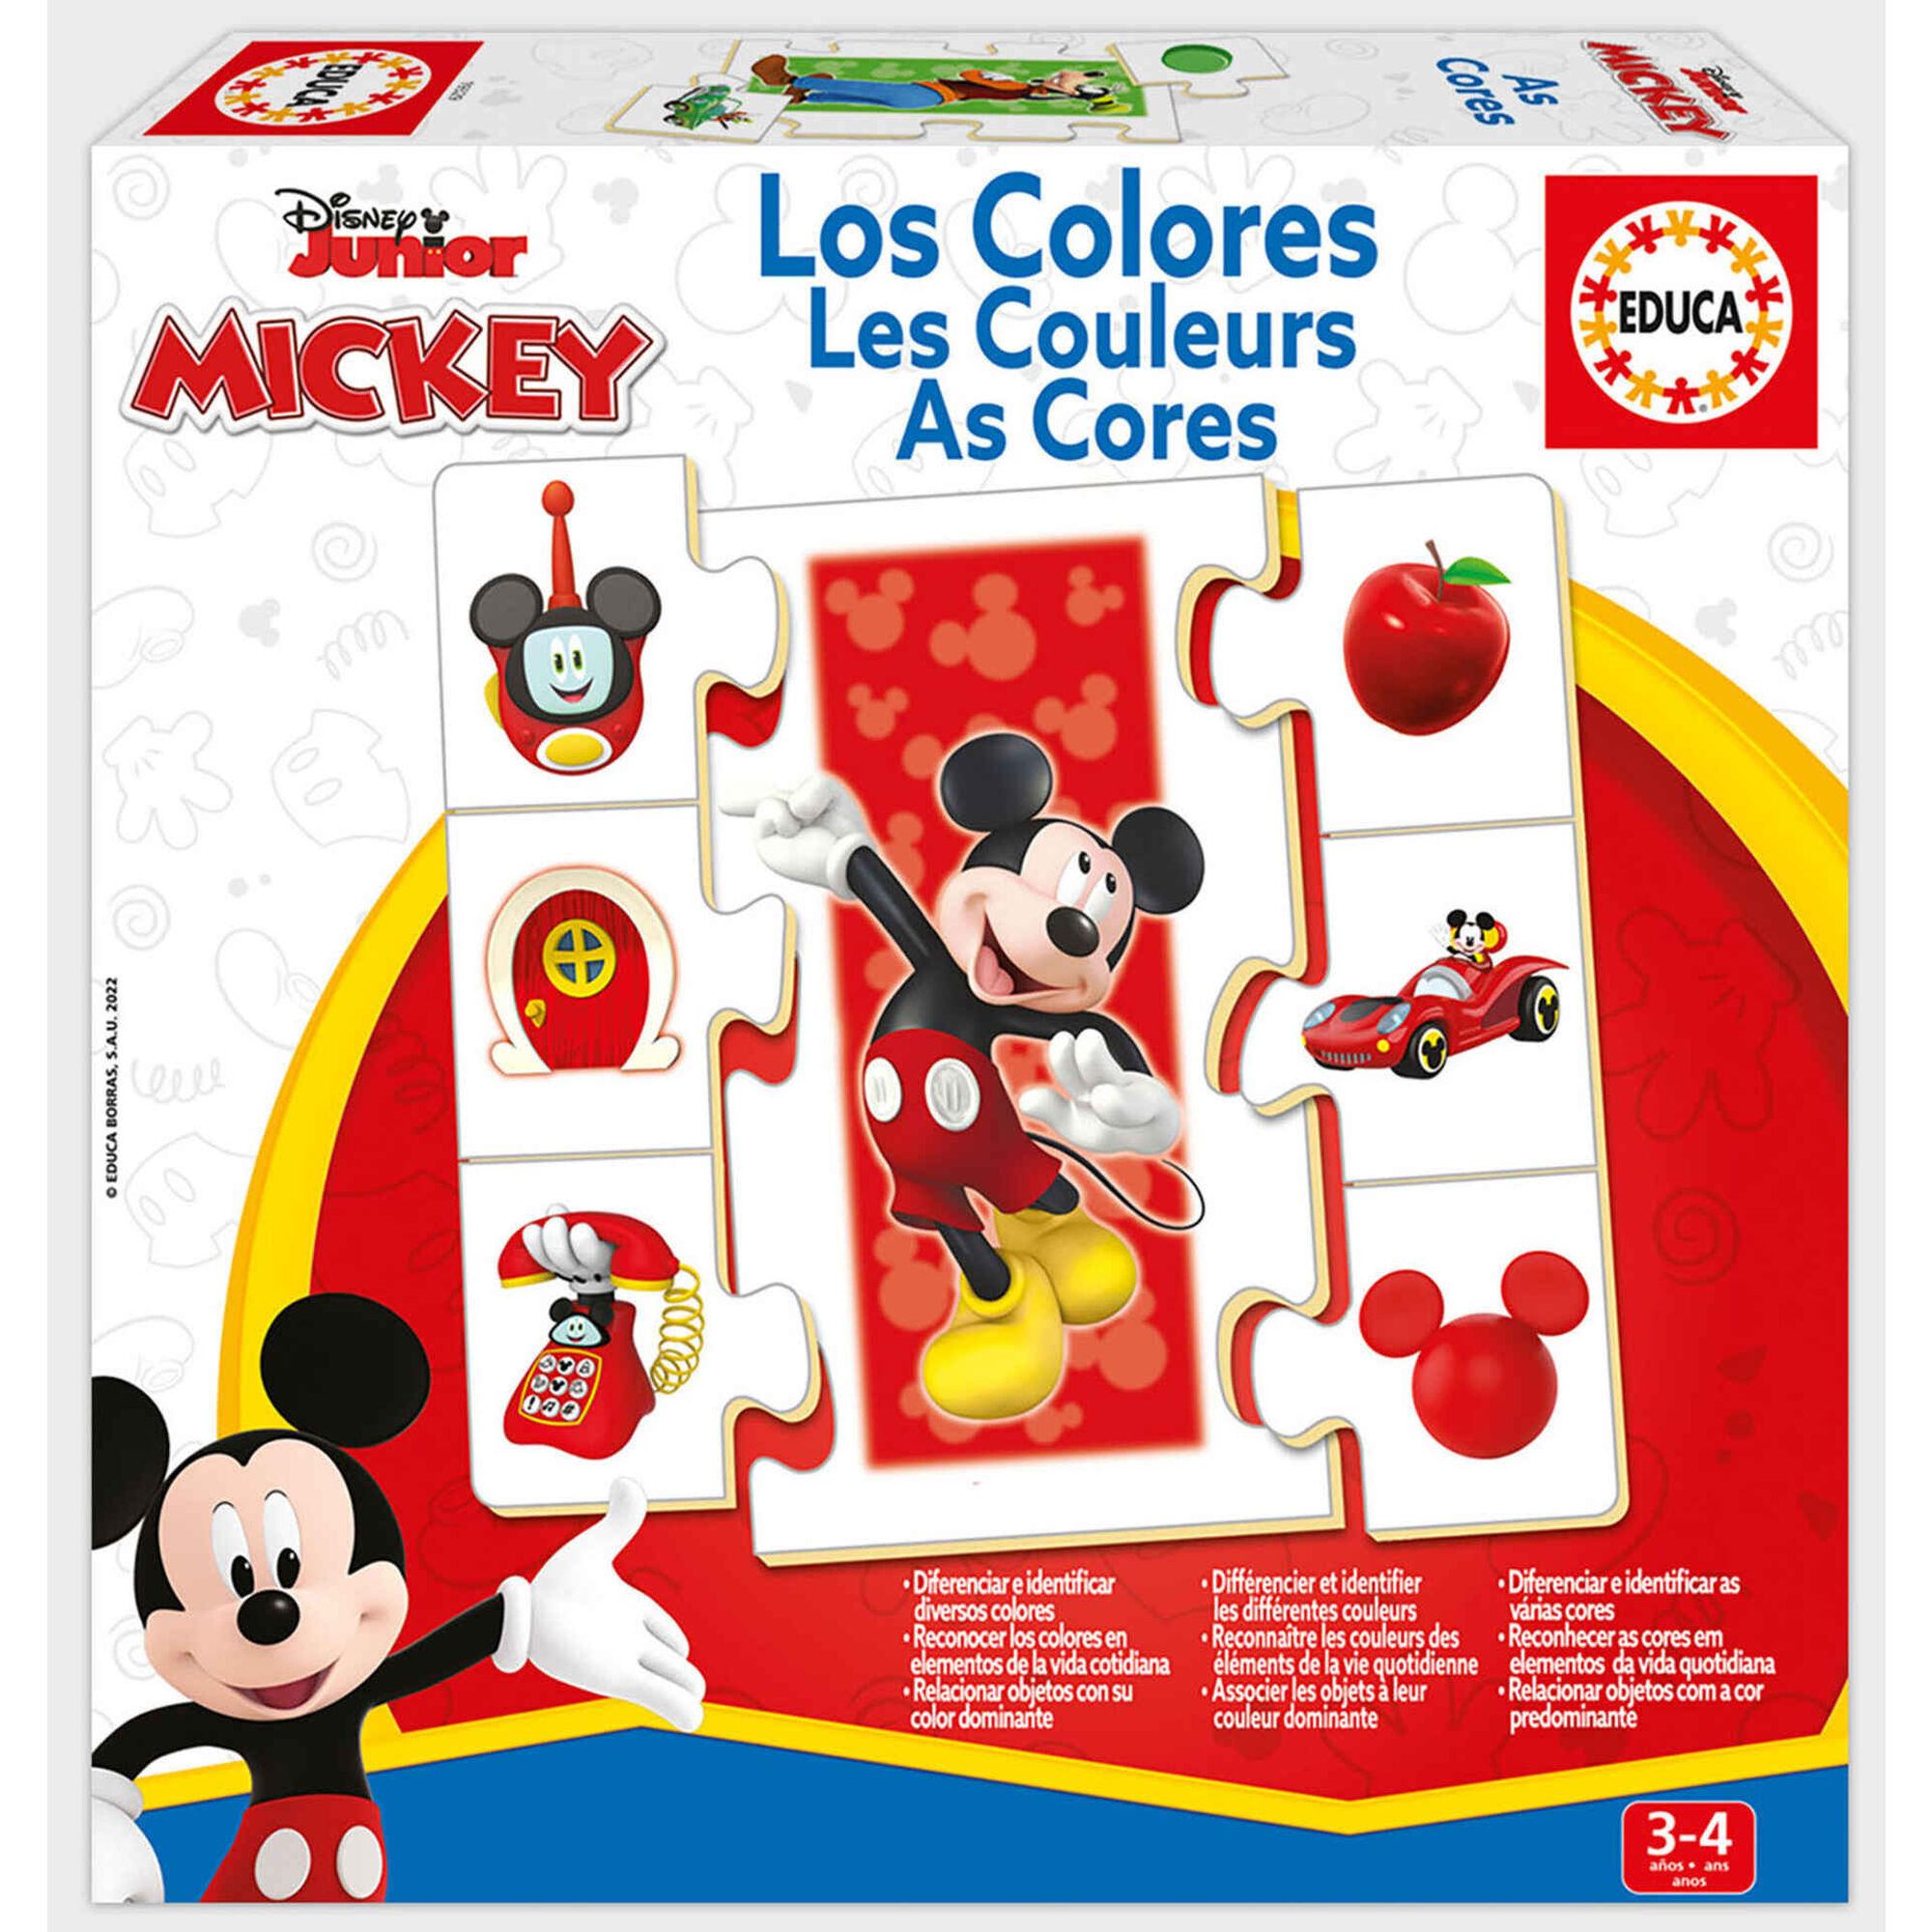 As Cores - Mickey and Friends